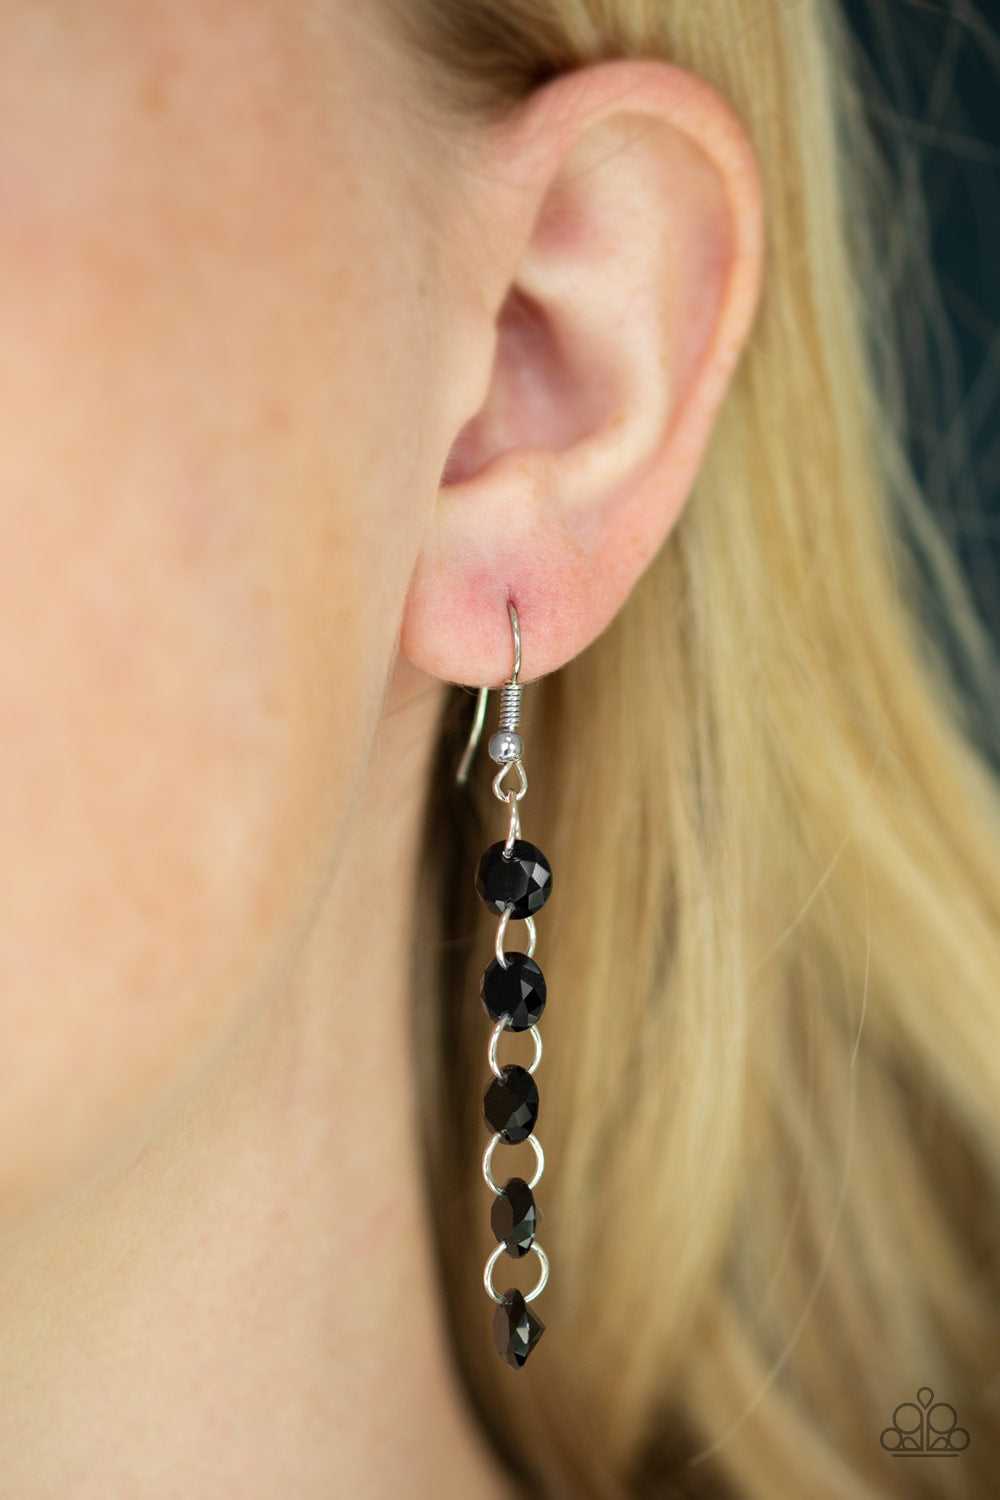 Trickle Down Effect Black Earring Paparazzi Accessories